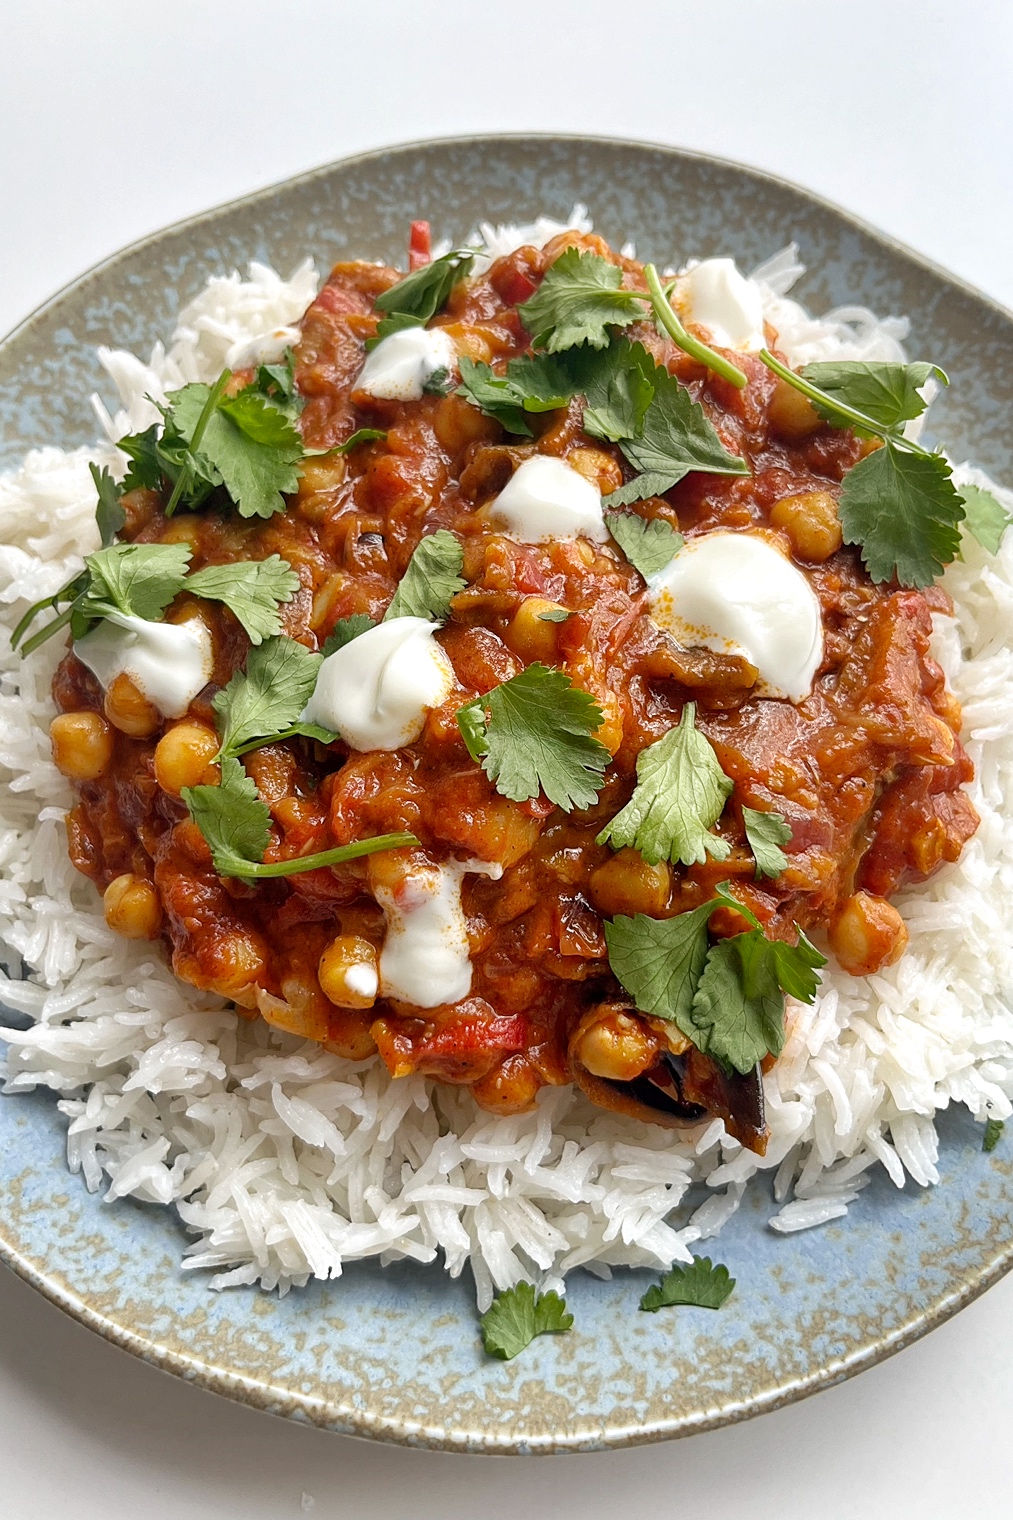 Aubergine and chickpea curry.